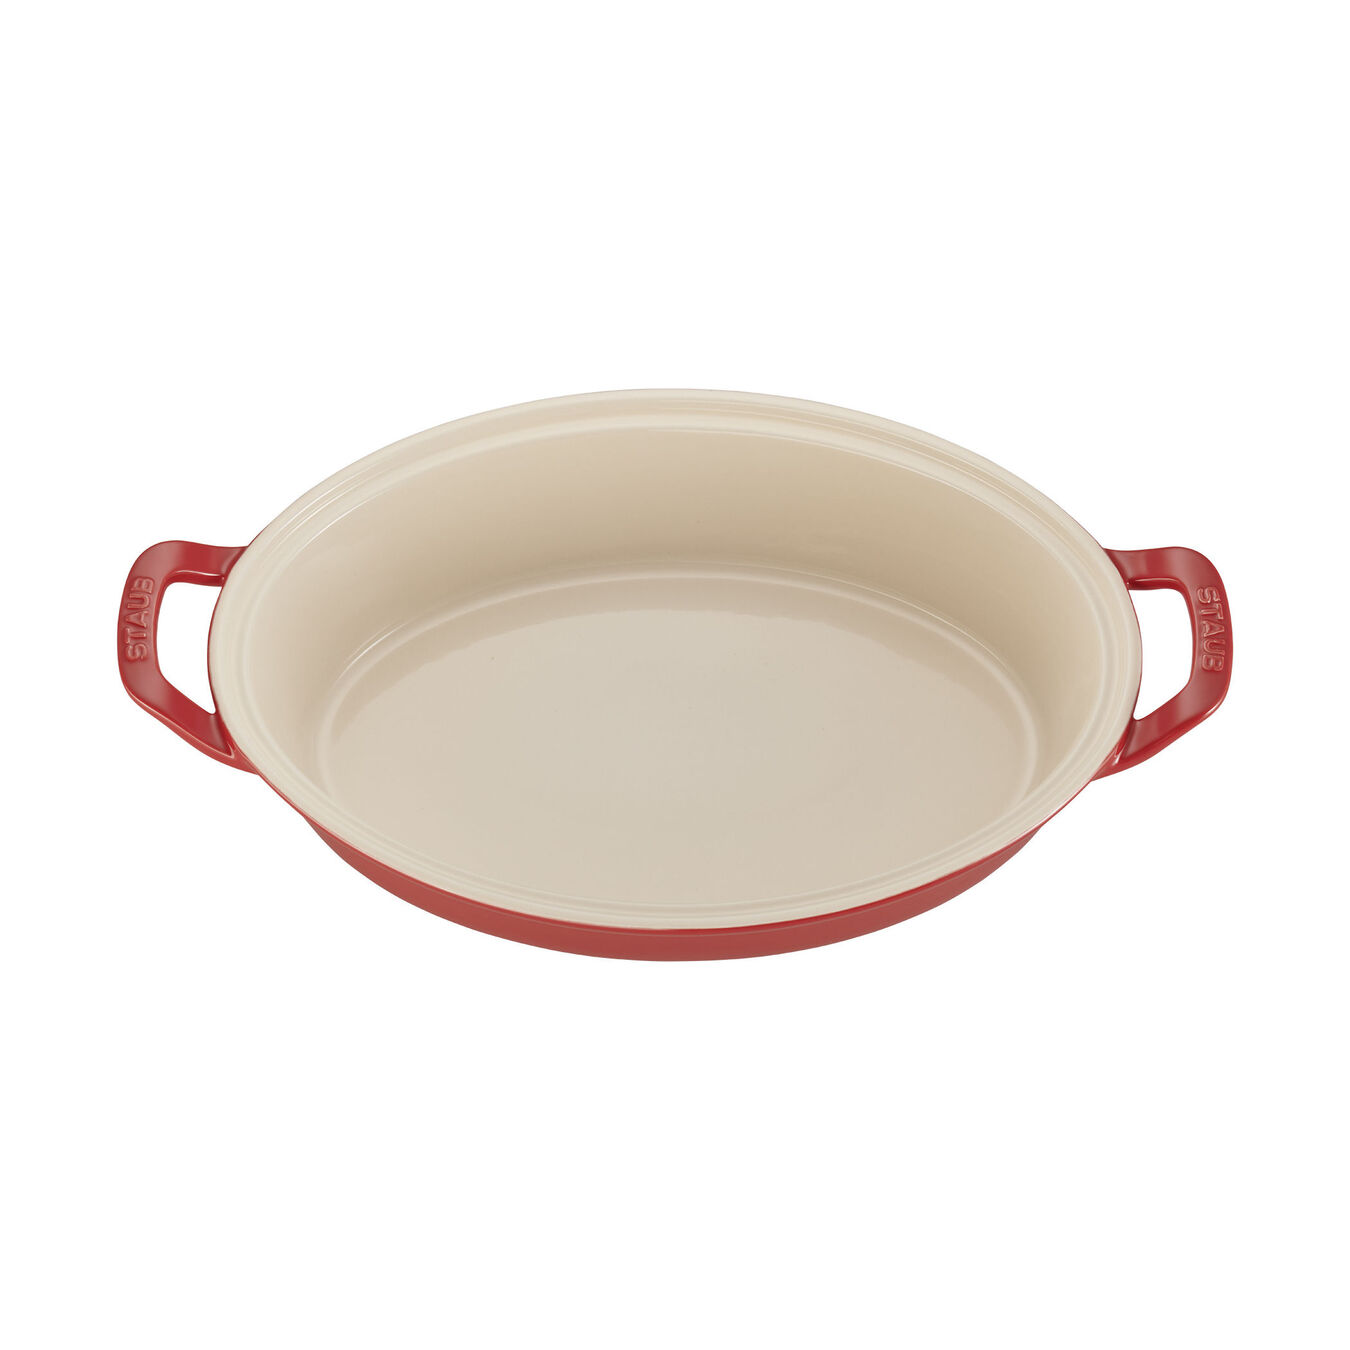  ceramic Special shape bakeware, cherry,,large 2